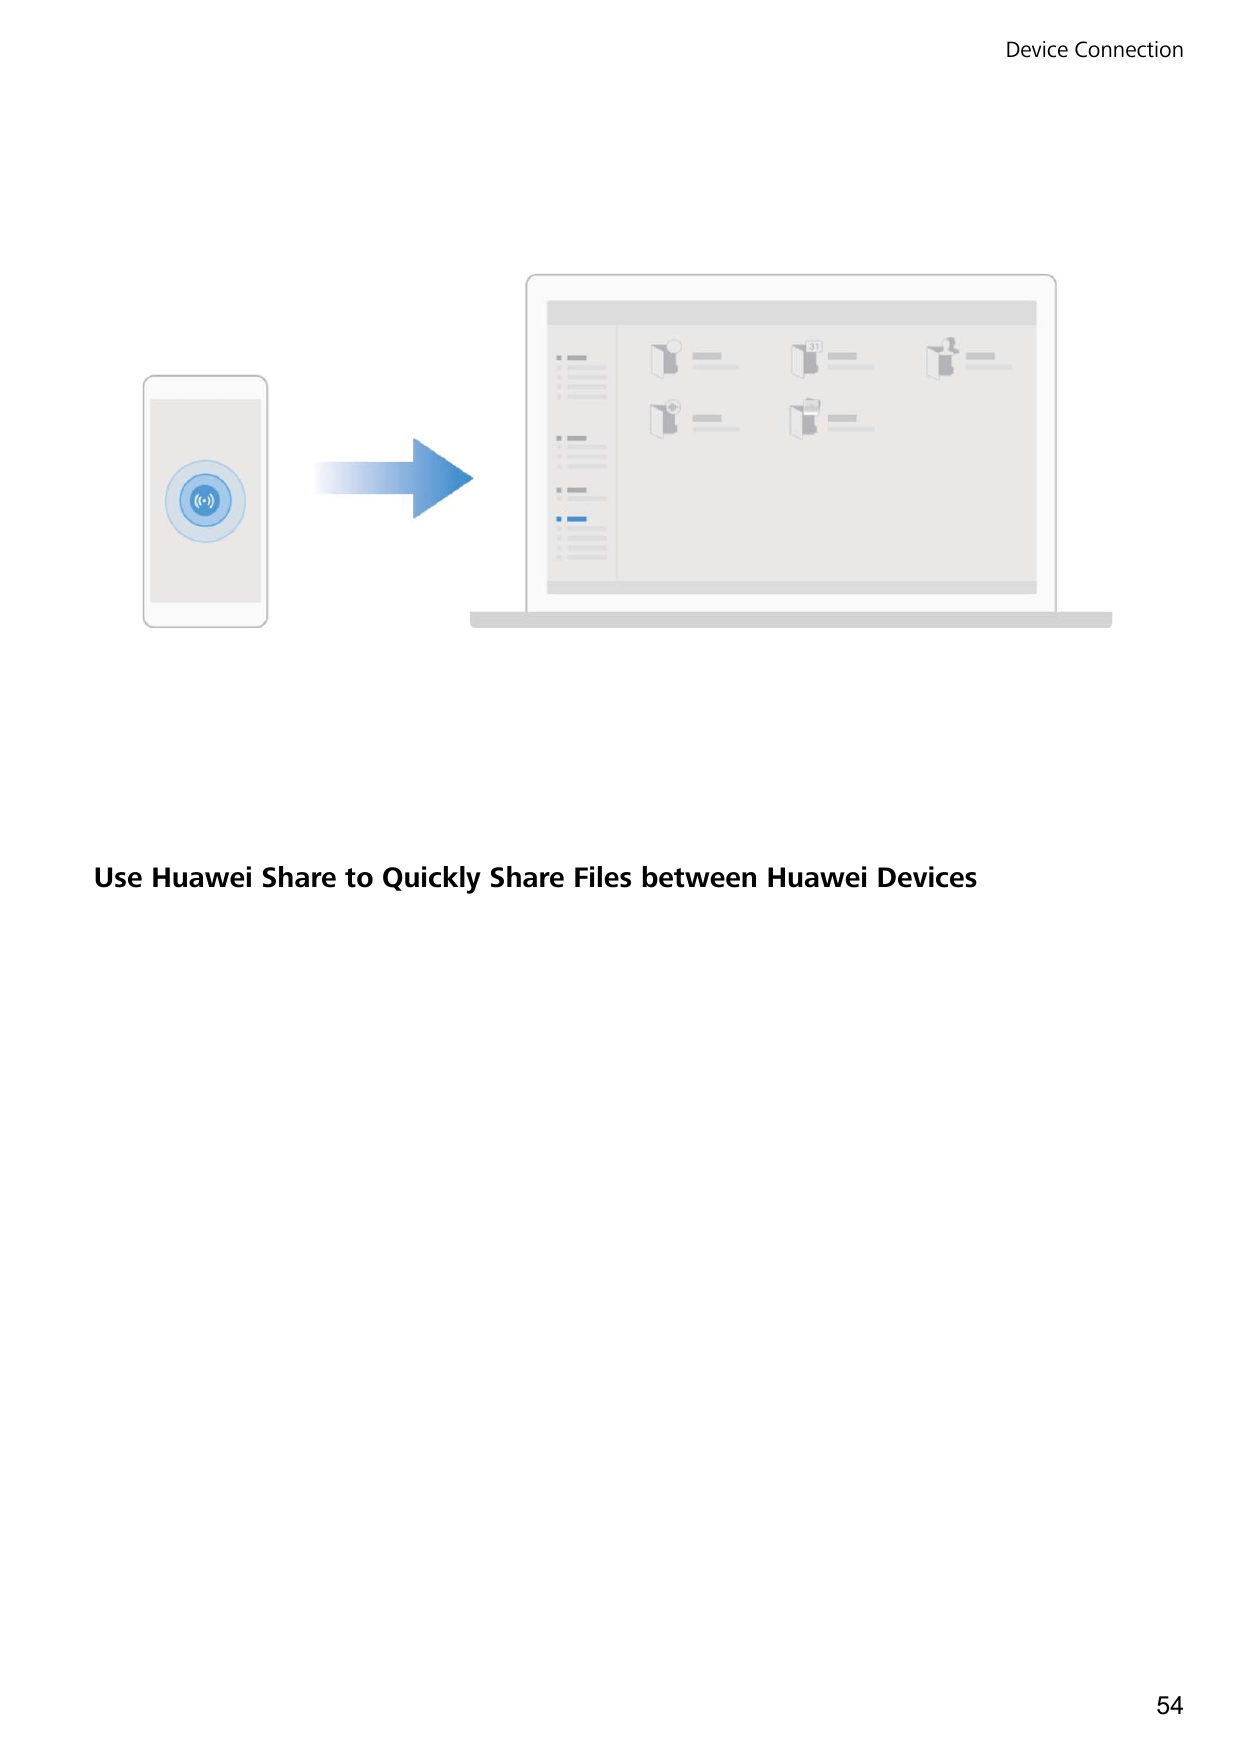 Device ConnectionUse Huawei Share to Quickly Share Files between Huawei Devices54